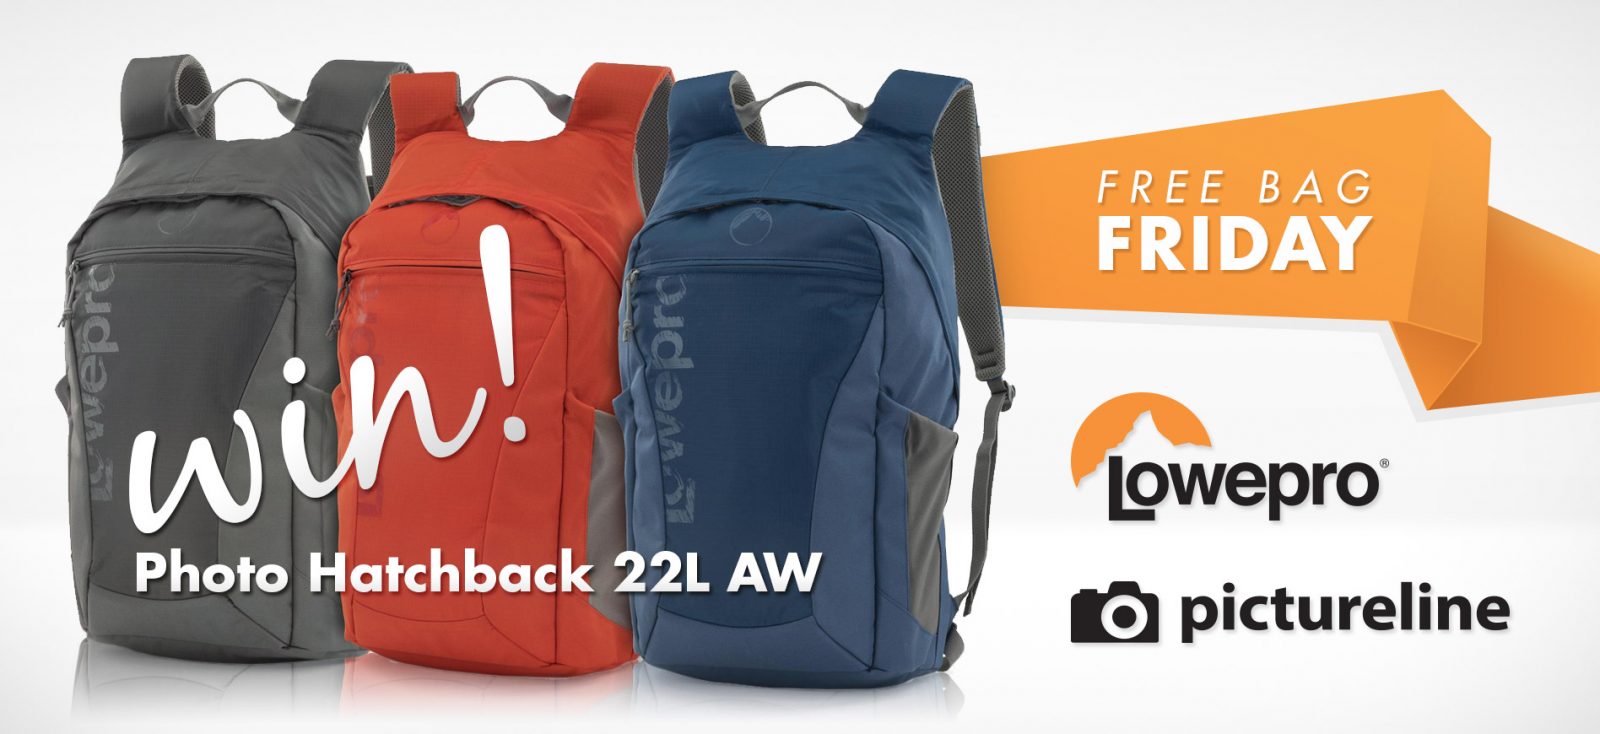 Win a Free Lowepro Photo Hatchback 22L Camera Backpack! ***CLOSED***